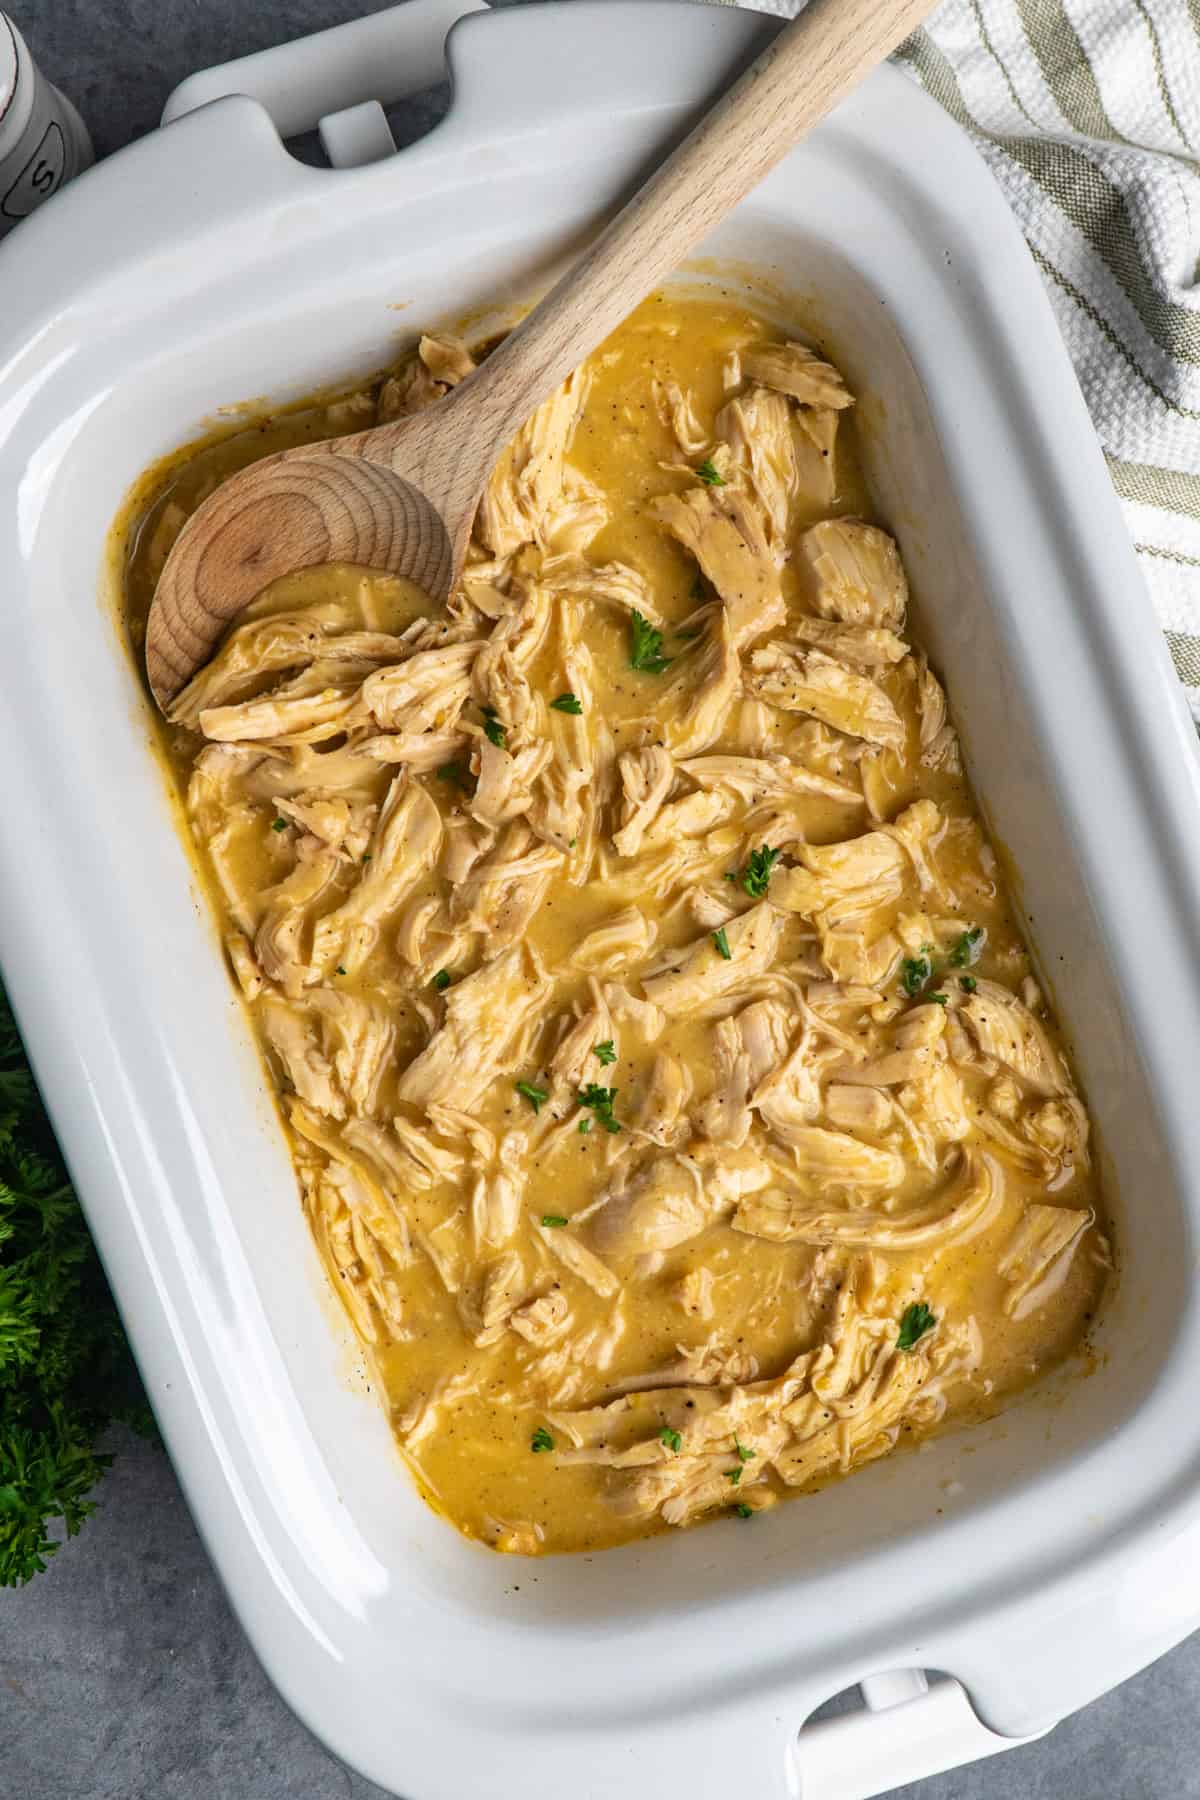 Chicken and gravy in a slow cooker with a wooden spoon.